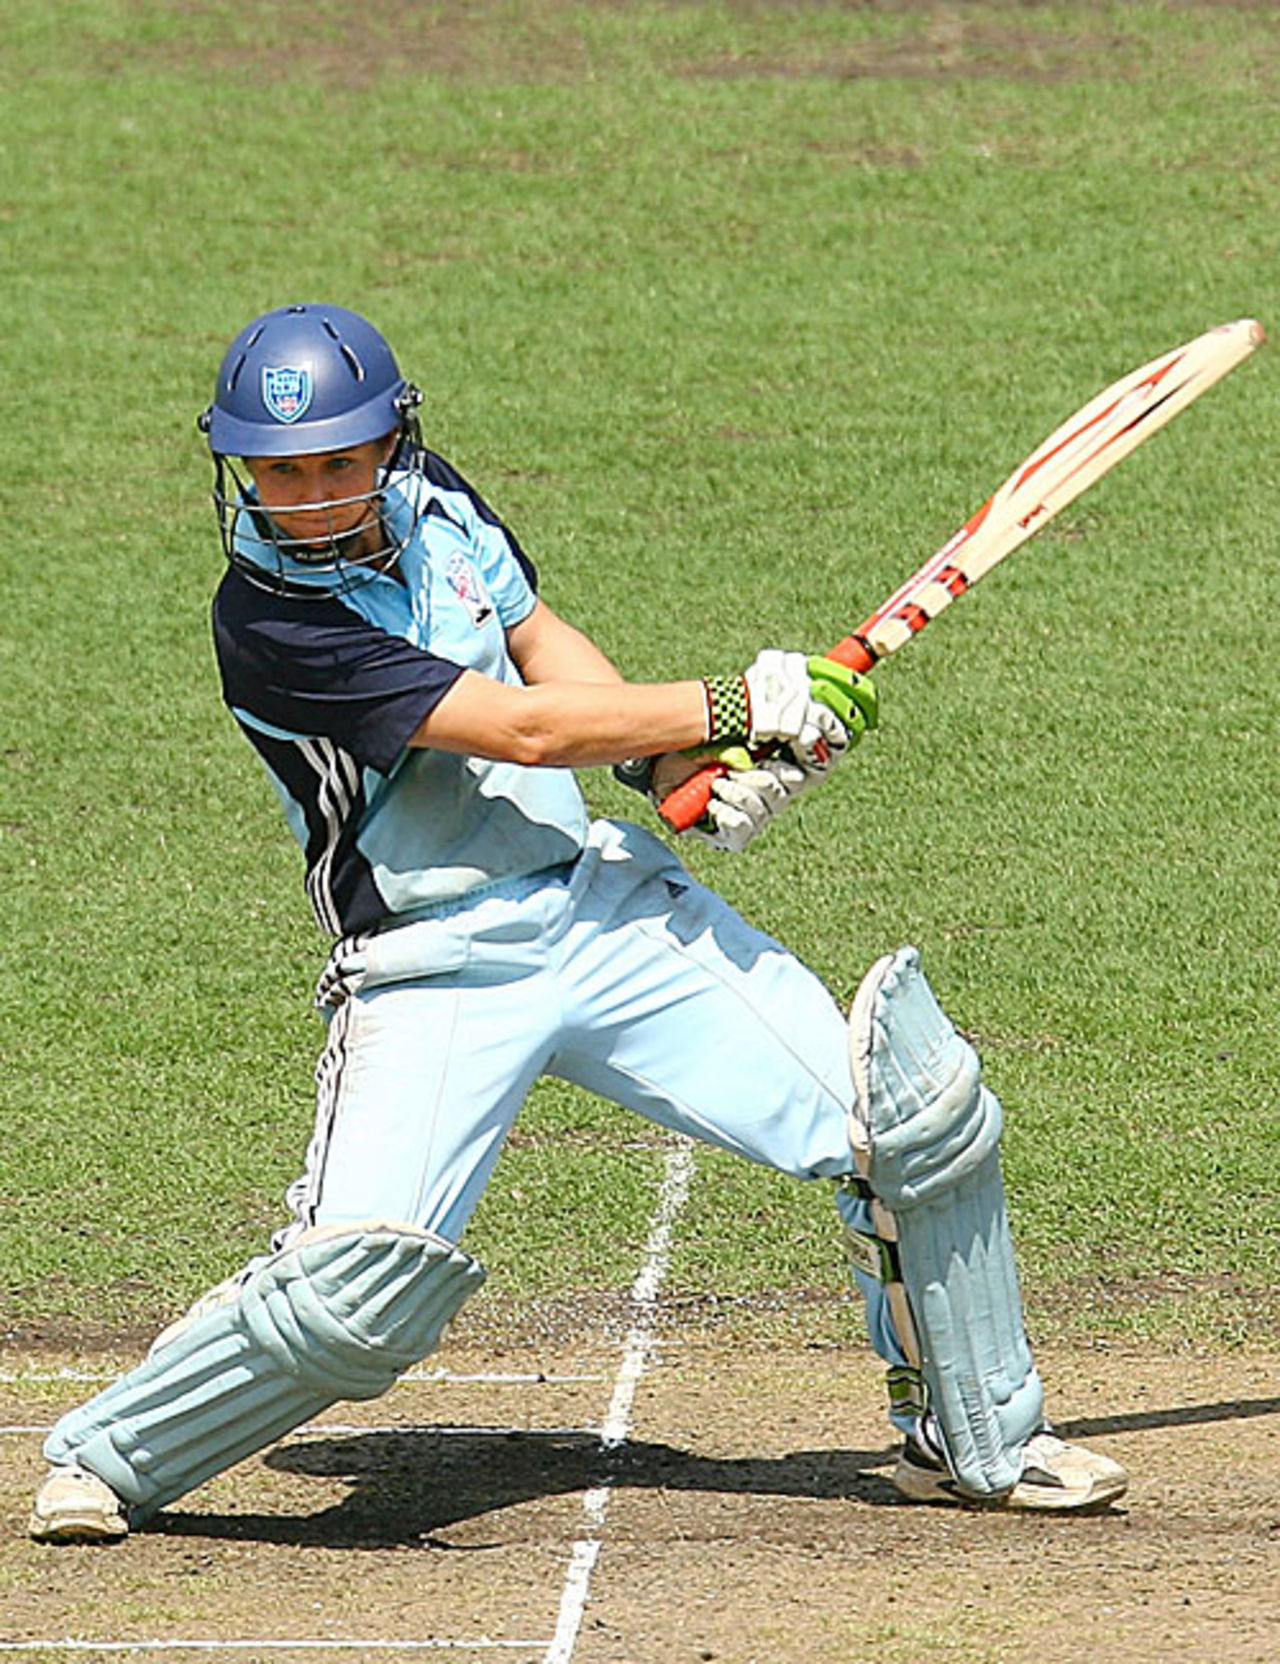 Leah Poulton top scored for New South Wales with 43, New South Wales Women v Western Australia Women, Women's National Cricket League, Sydney, December 6, 2008